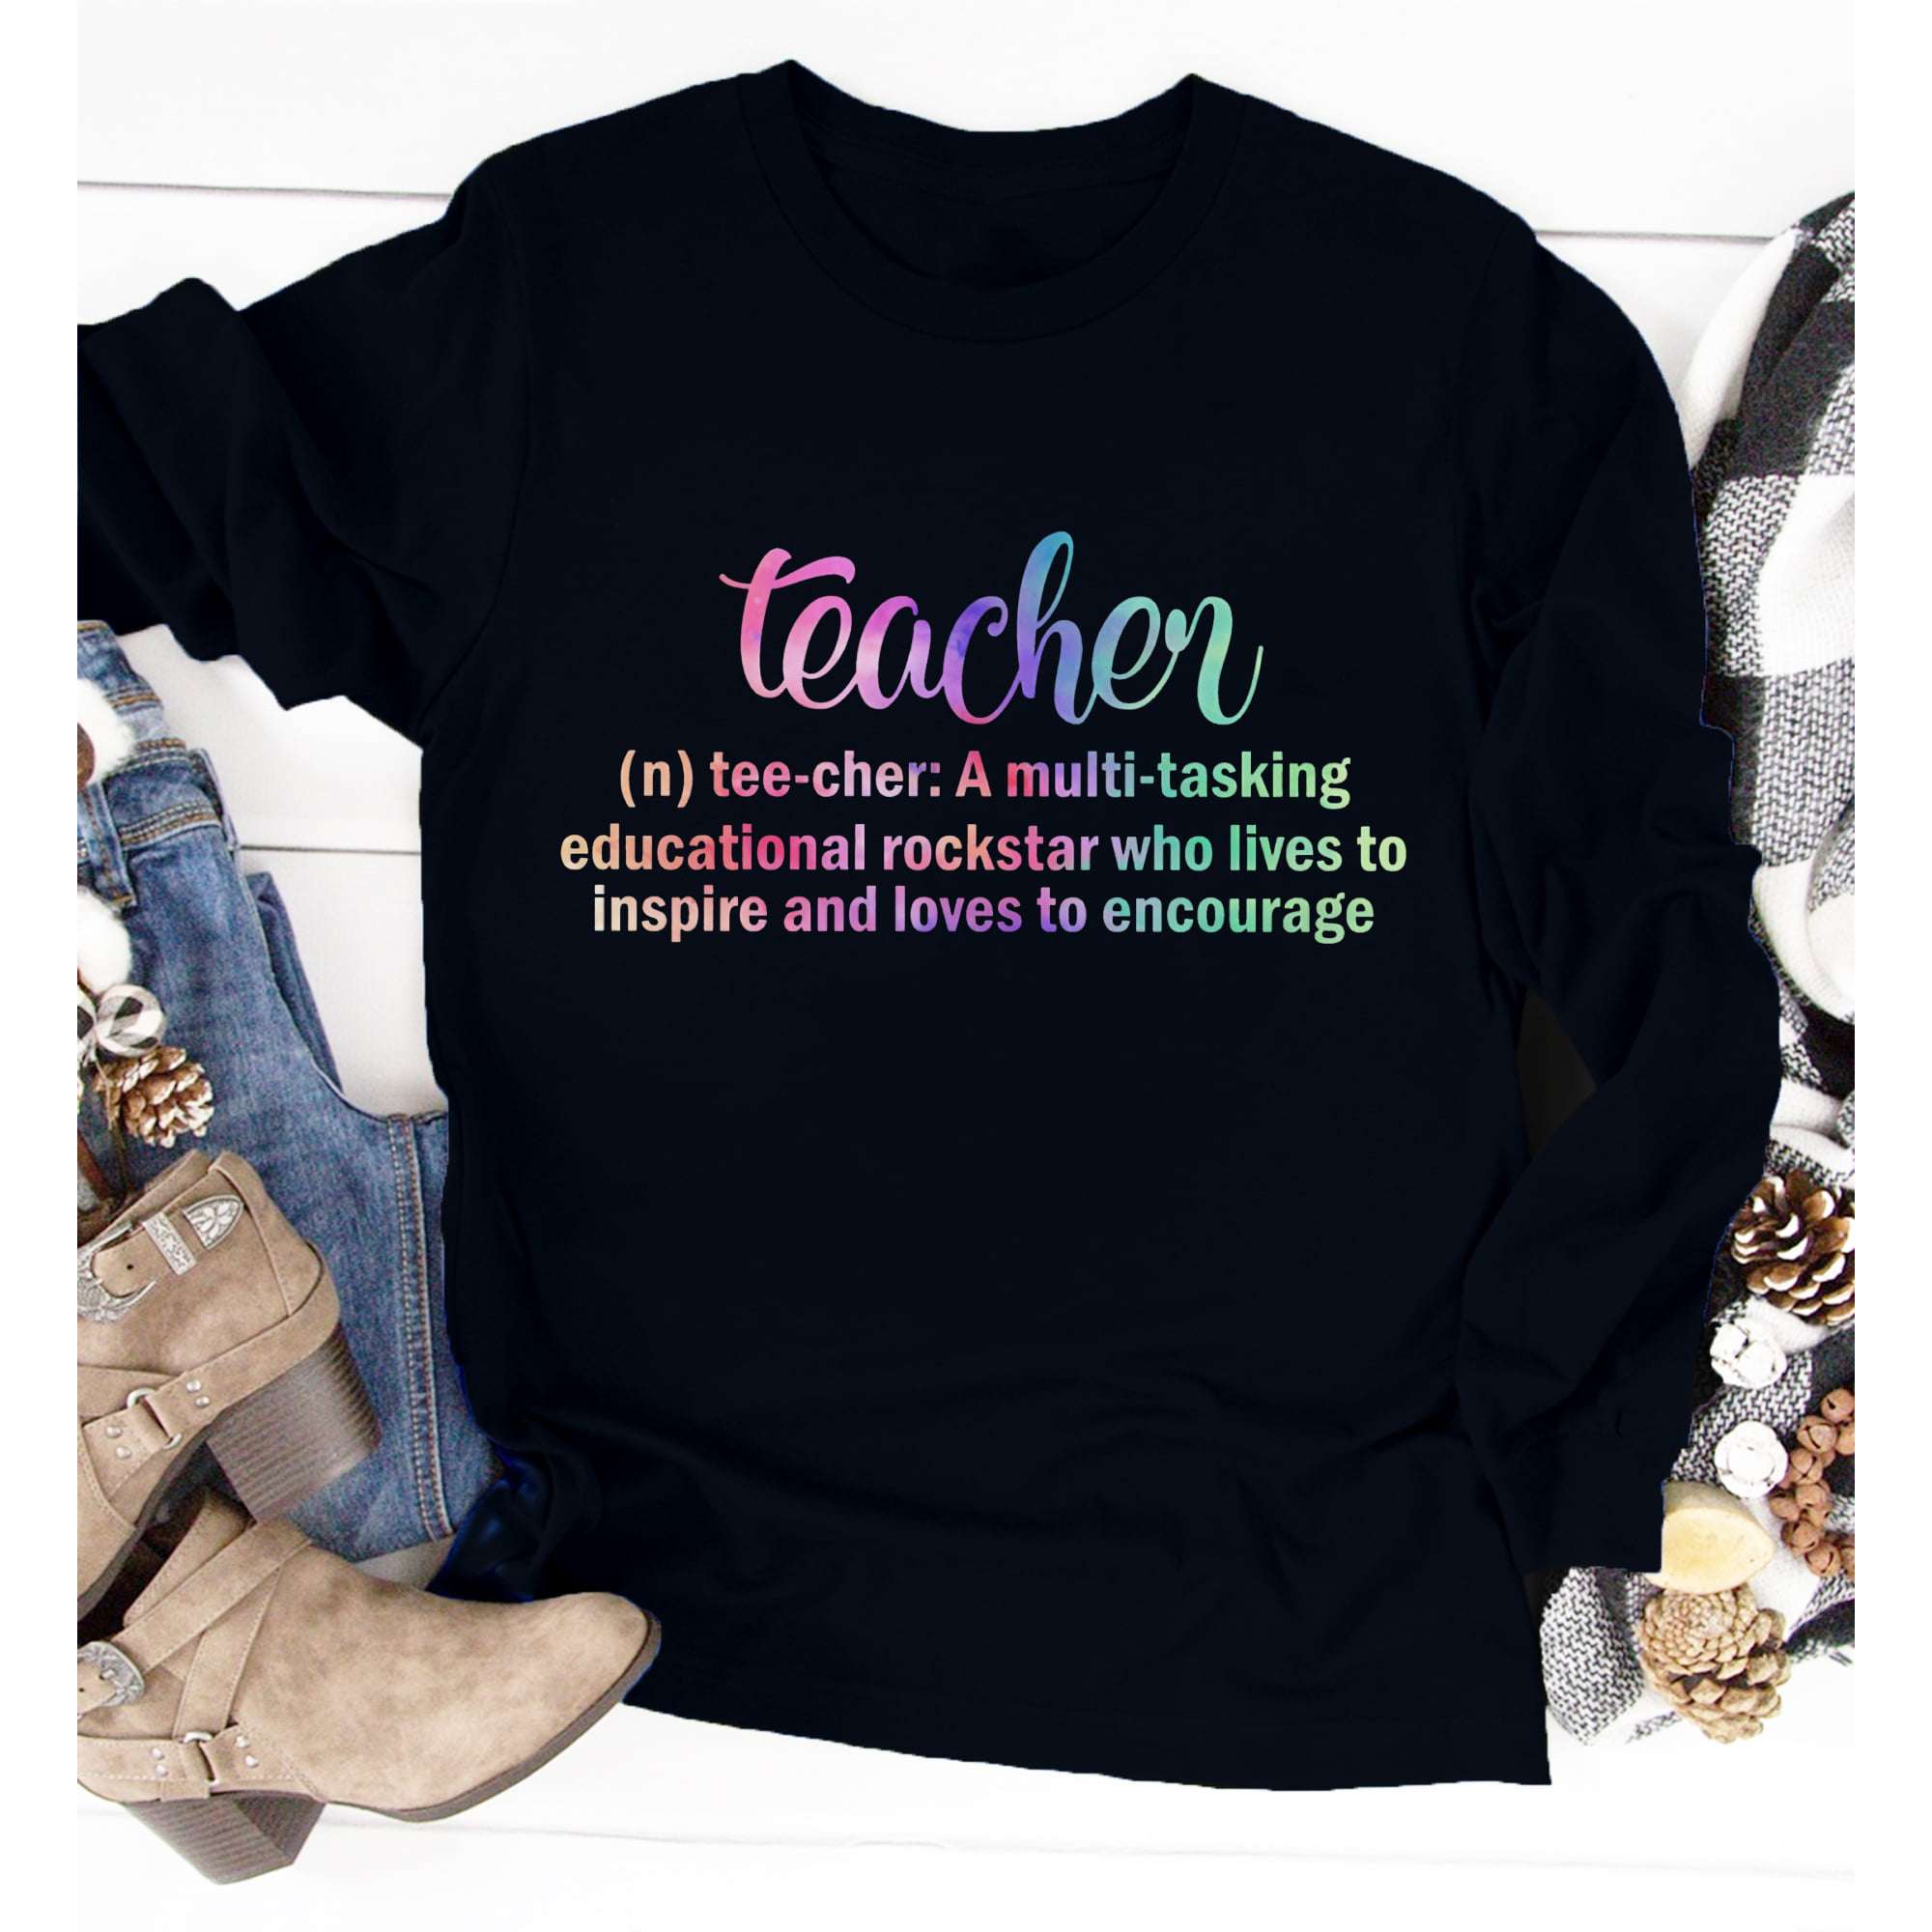 Teacher is a multi tasking educational rockstar who lives to inspire and loves to encourage - Teacher educational job